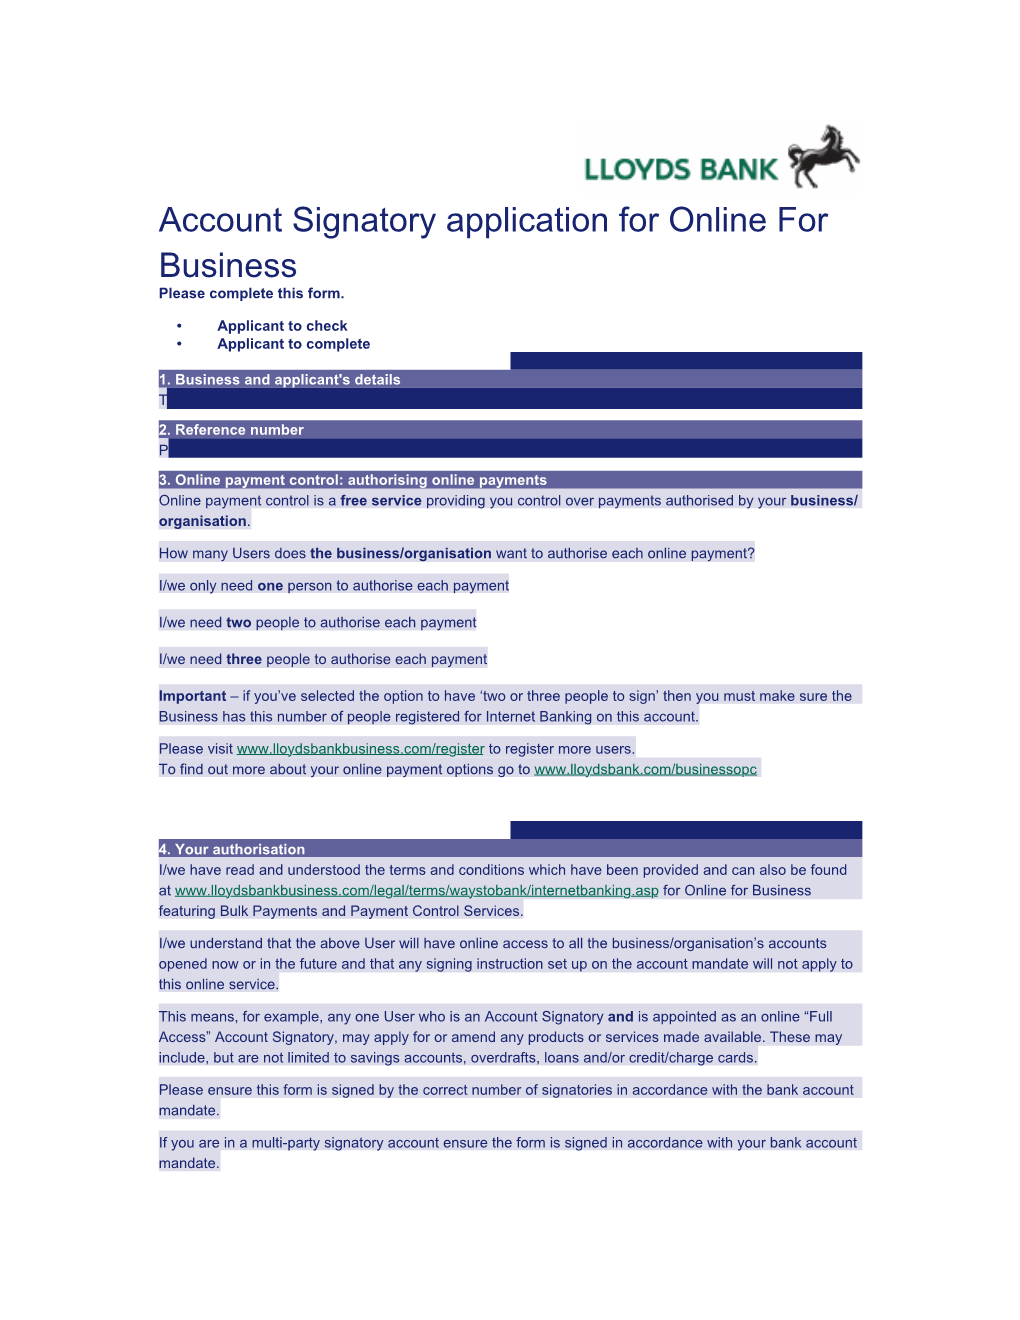 Account Signatory Application for Online for Business Please Complete This Form